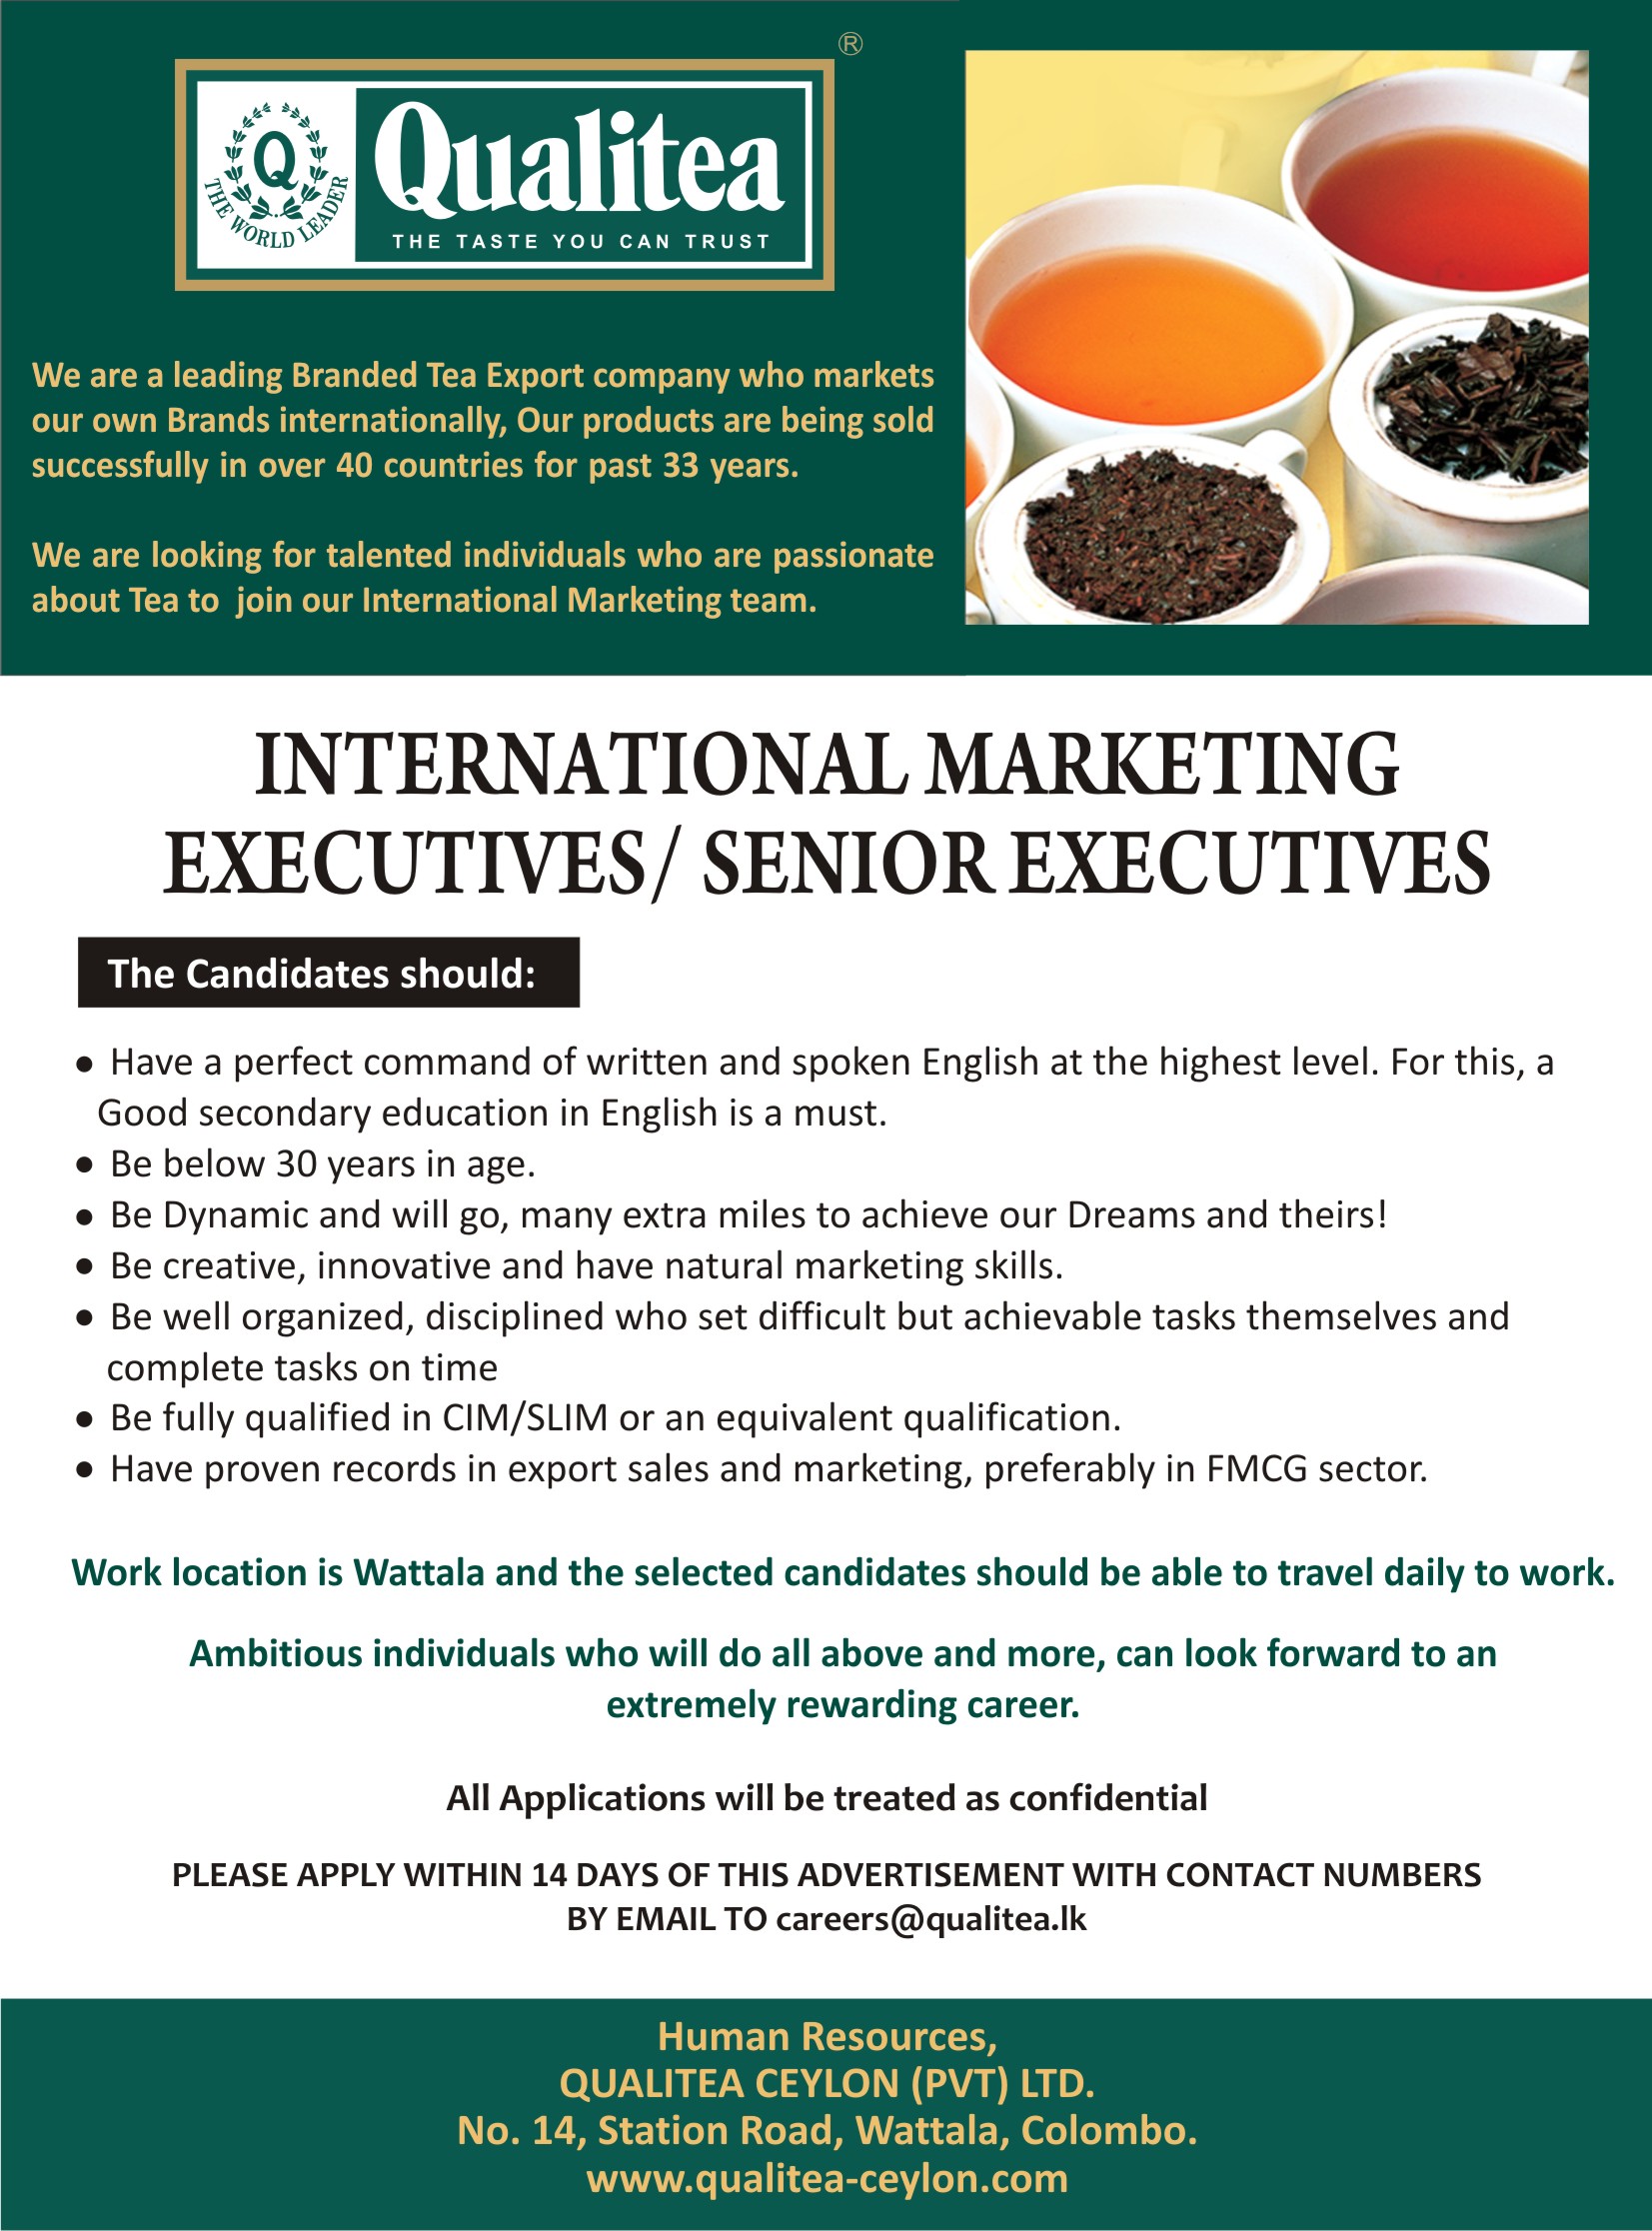 We're hiring. Here's your opportunity to join our team as an International Marketing Executive/Senior Executive